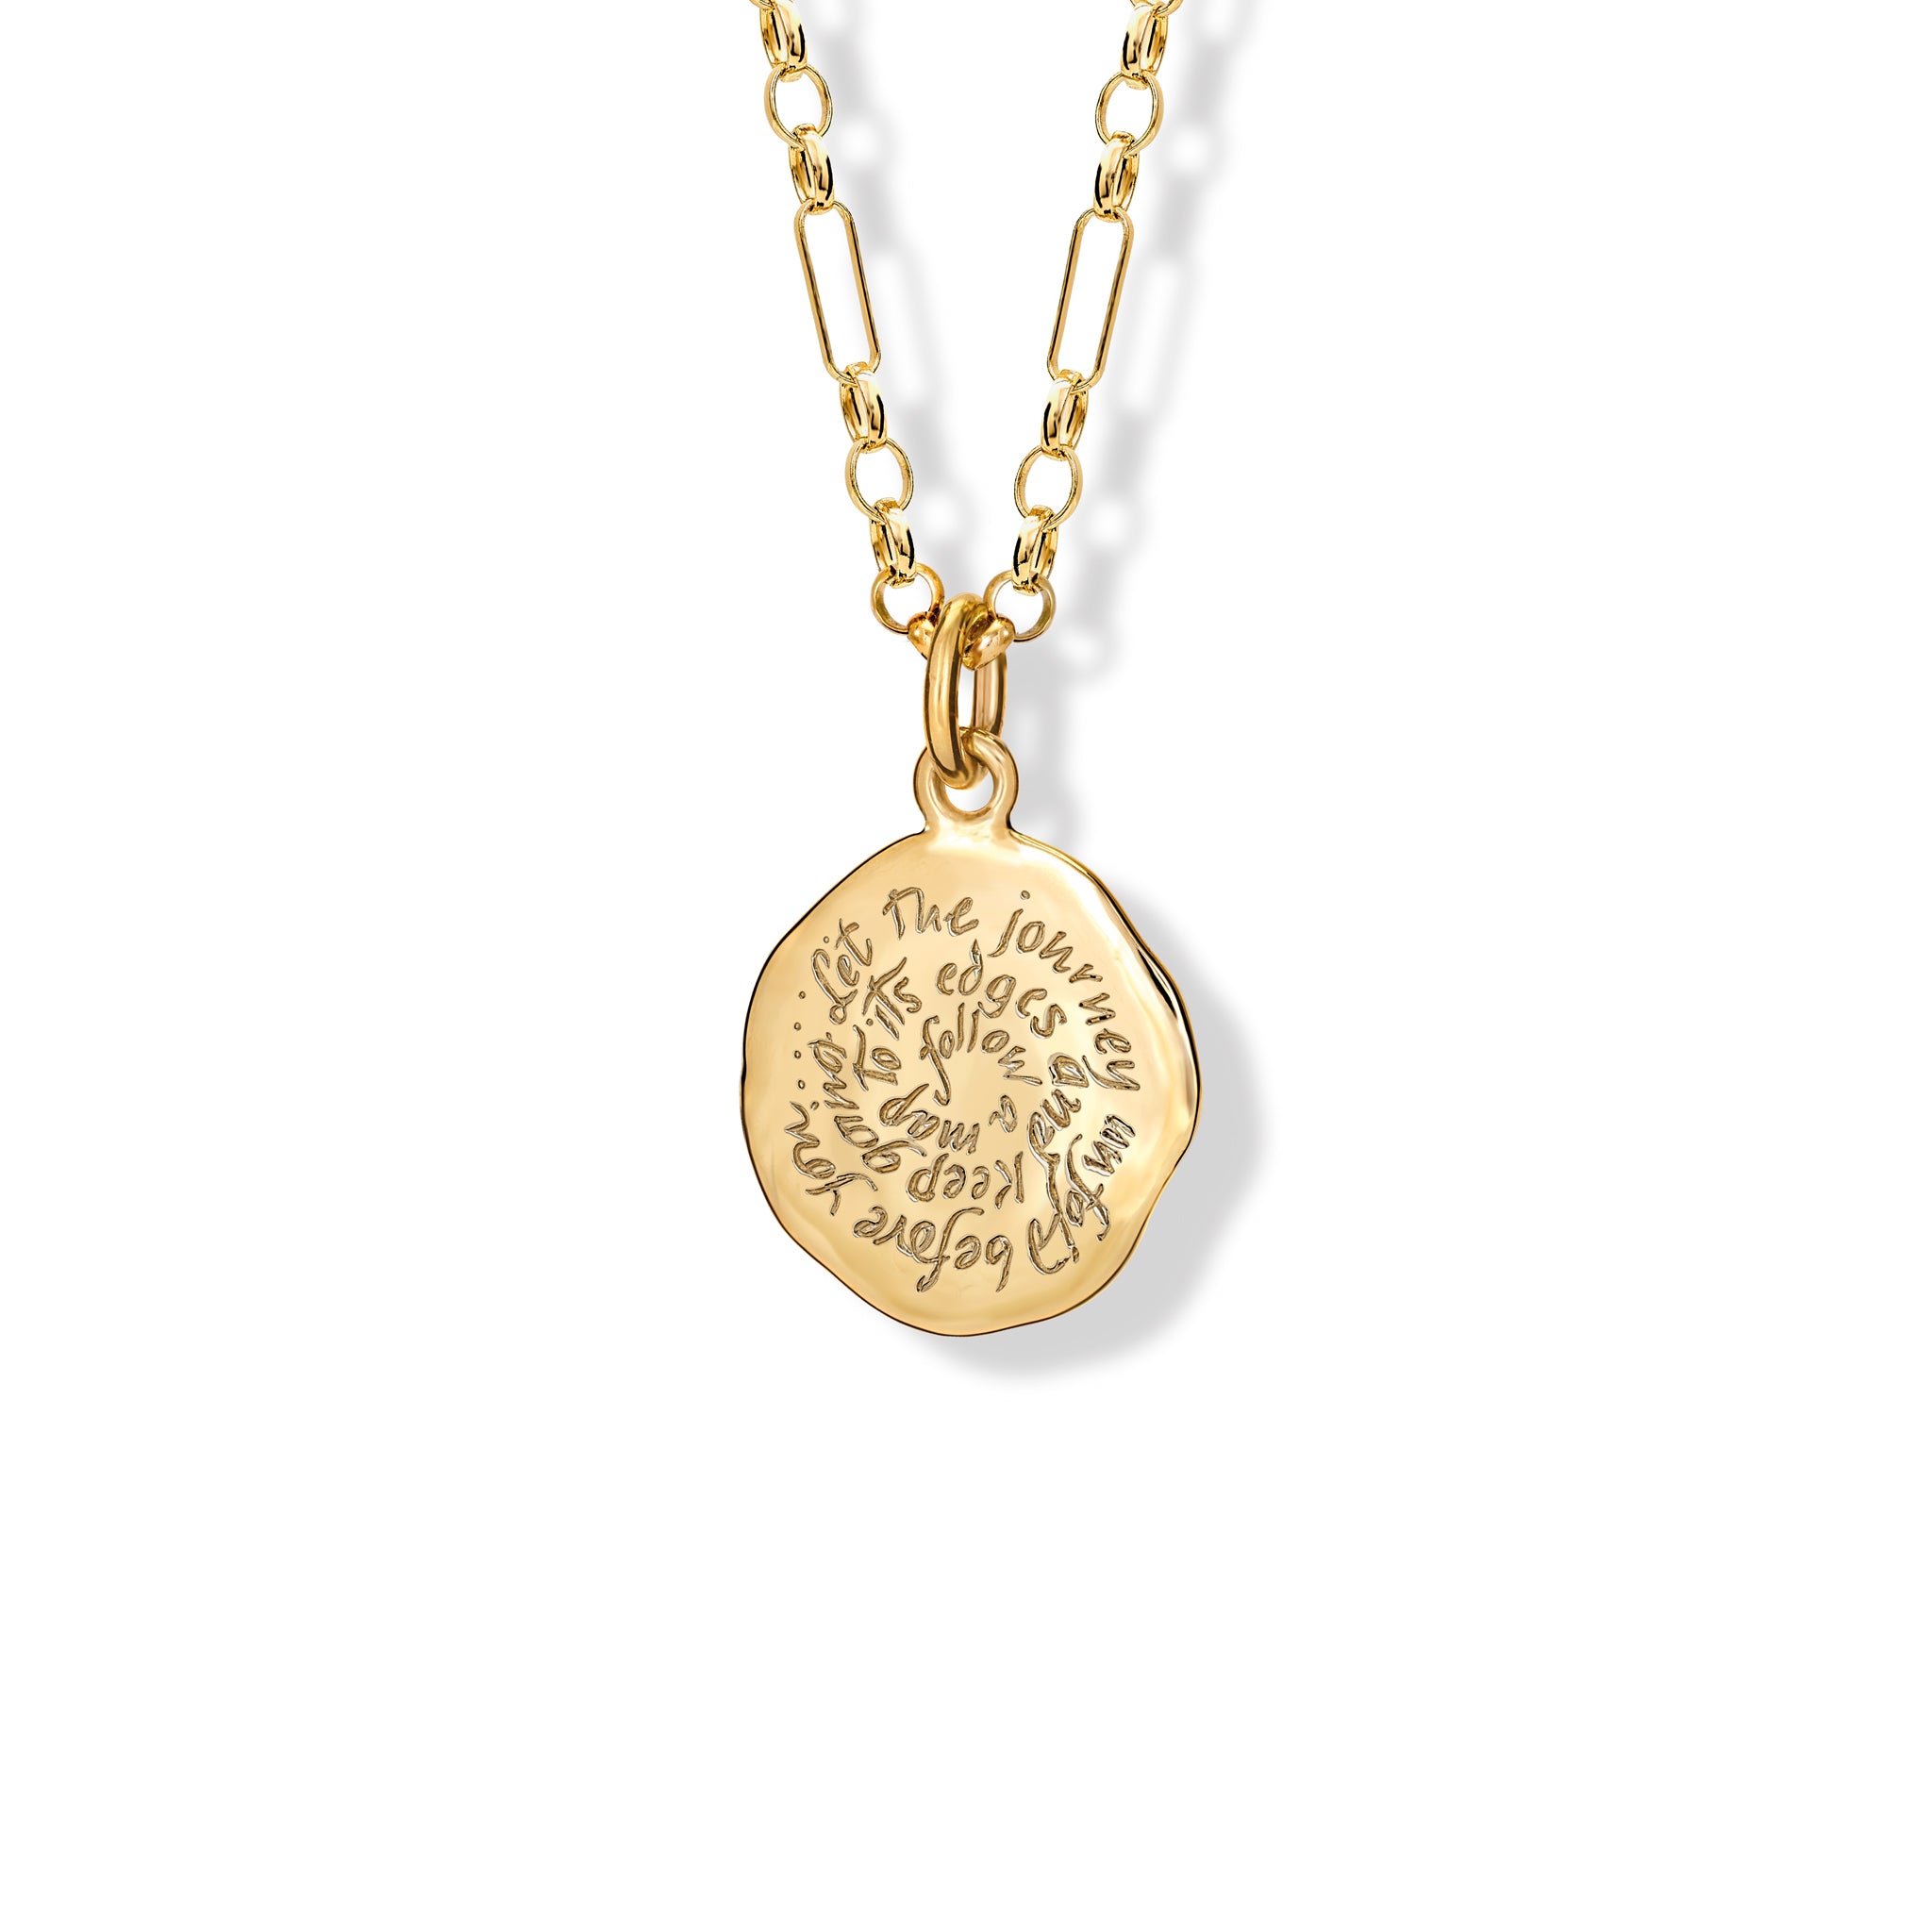 Follow A Map To Its Edges Quote Pendant 18ct Yellow Gold